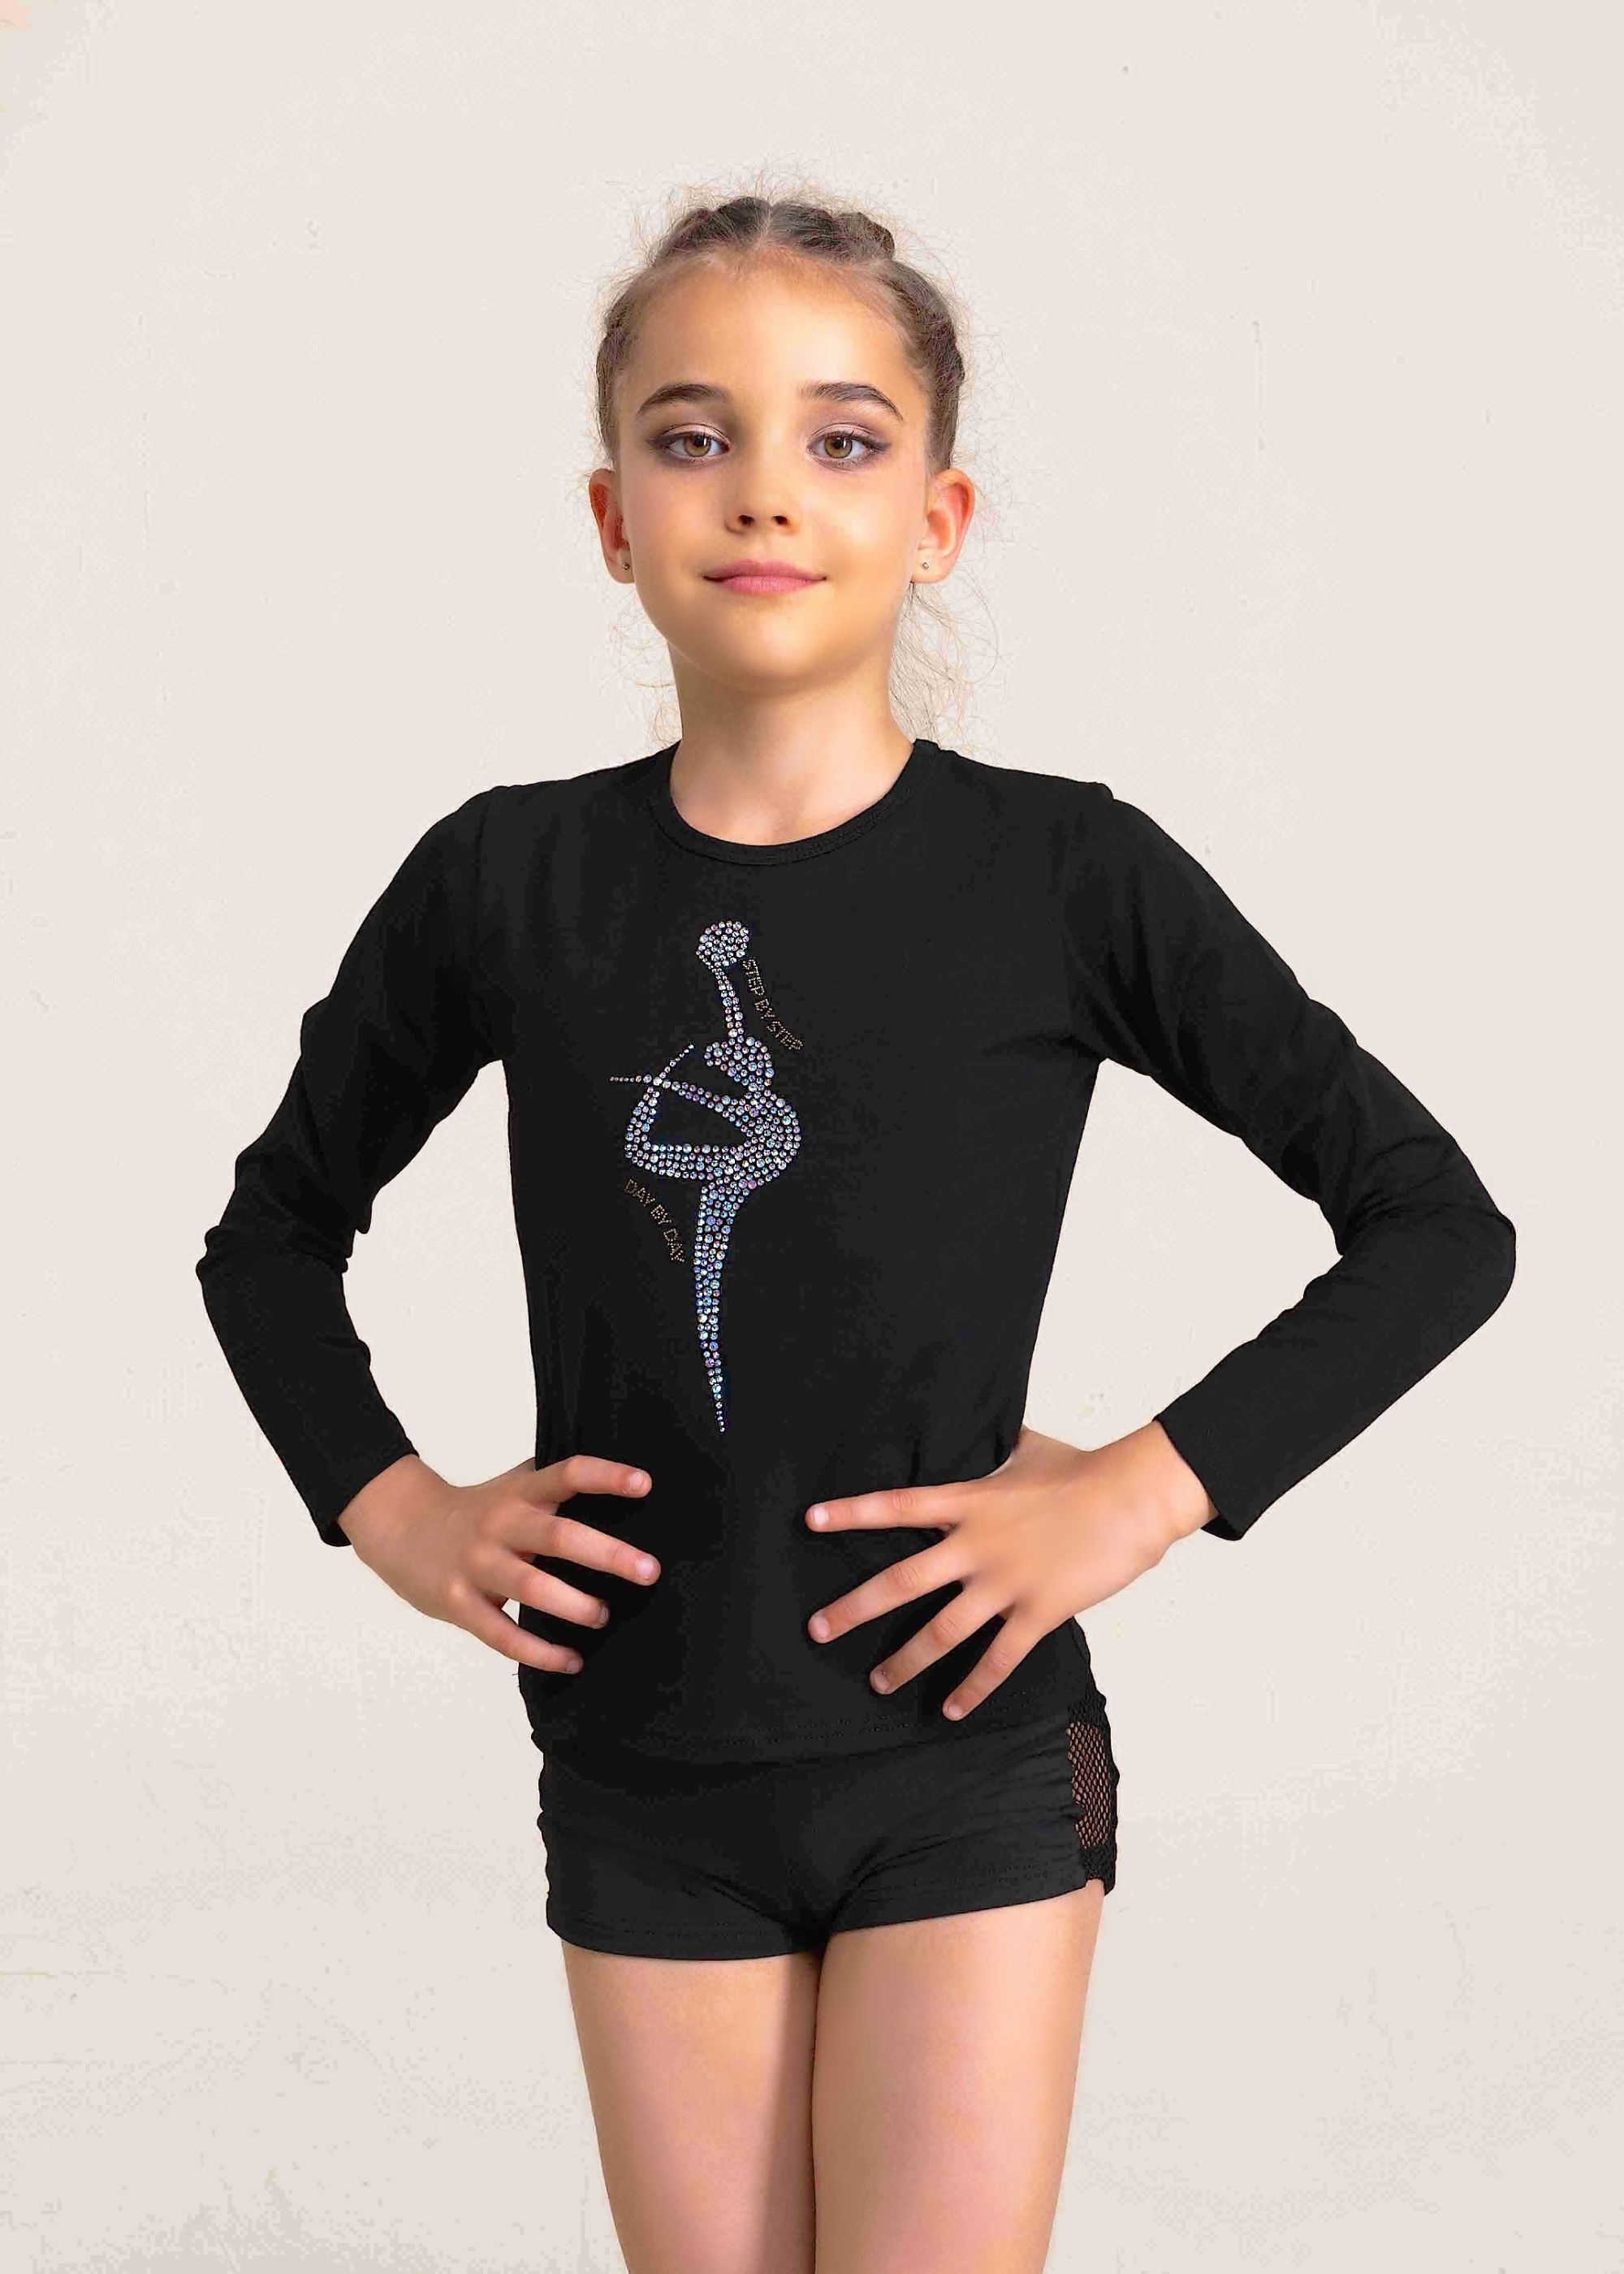 PAMELA long sleeve, gymnast with a ball by Grand Prix